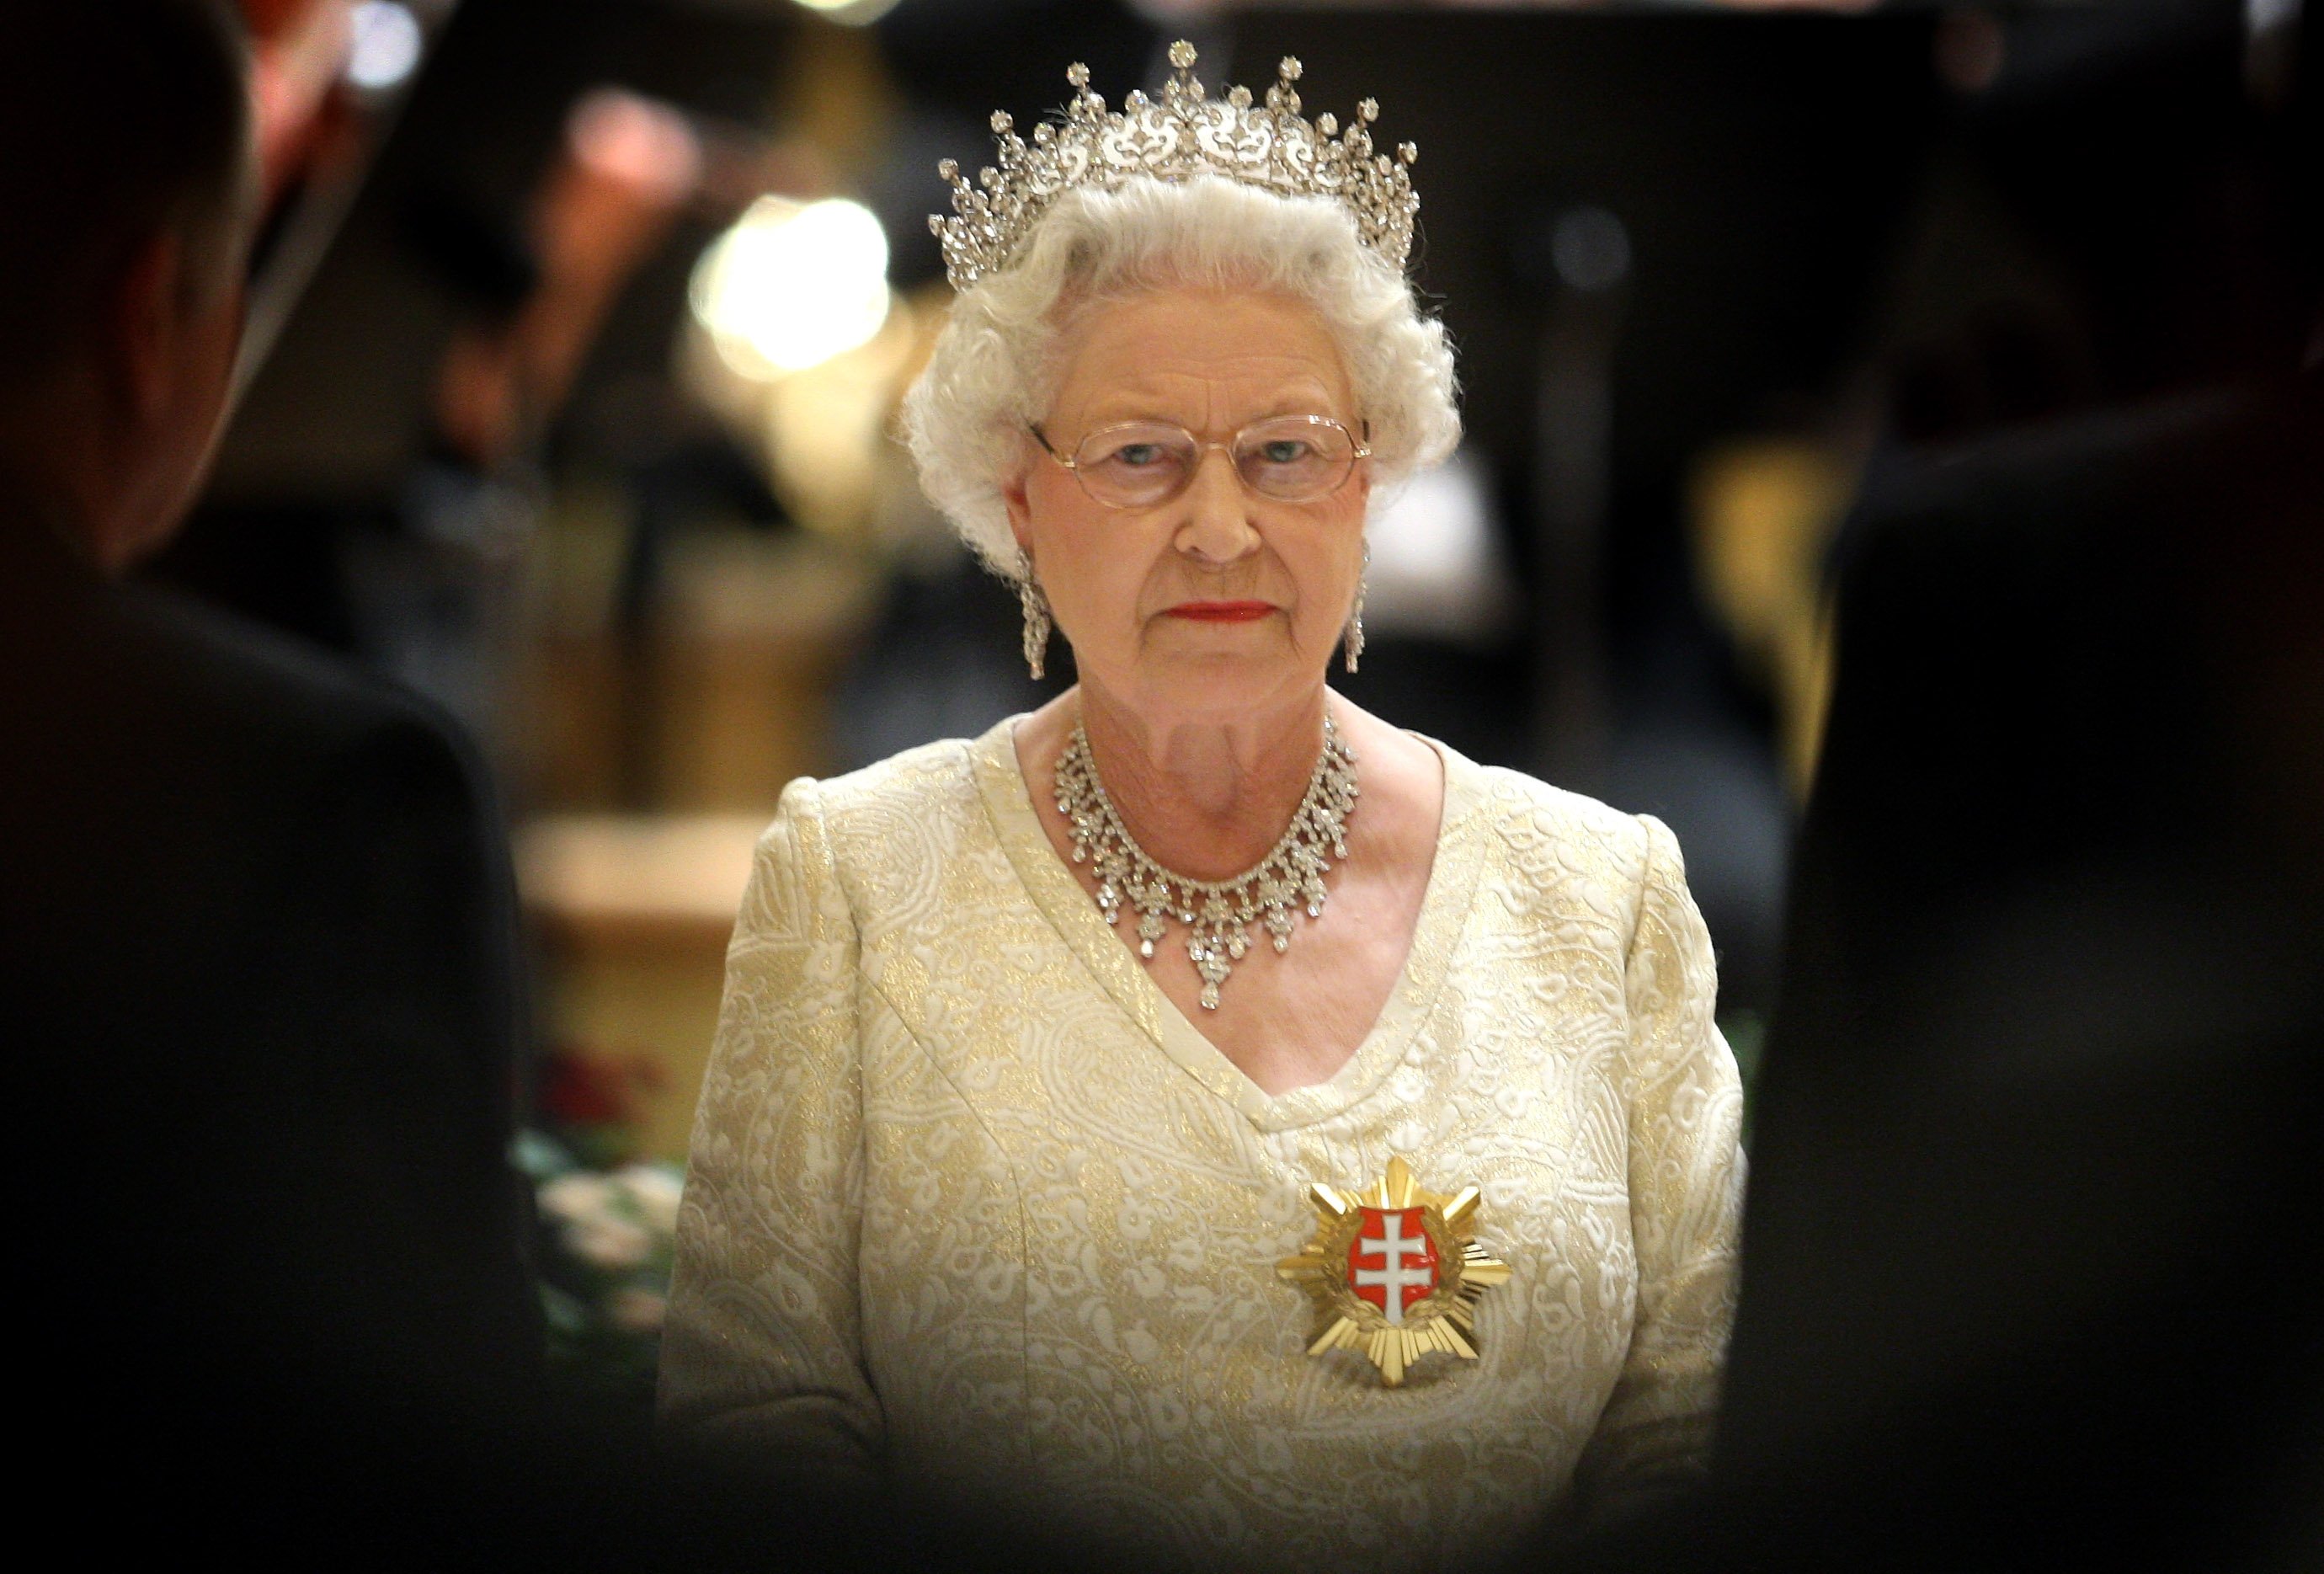 HRH Queen Elizabeth II at a State Banquet at the Philharmonic Hall on the first day of a tour of Slovakia on October 23, 2008 in Bratislava, Slovakia. | Source: Getty Images